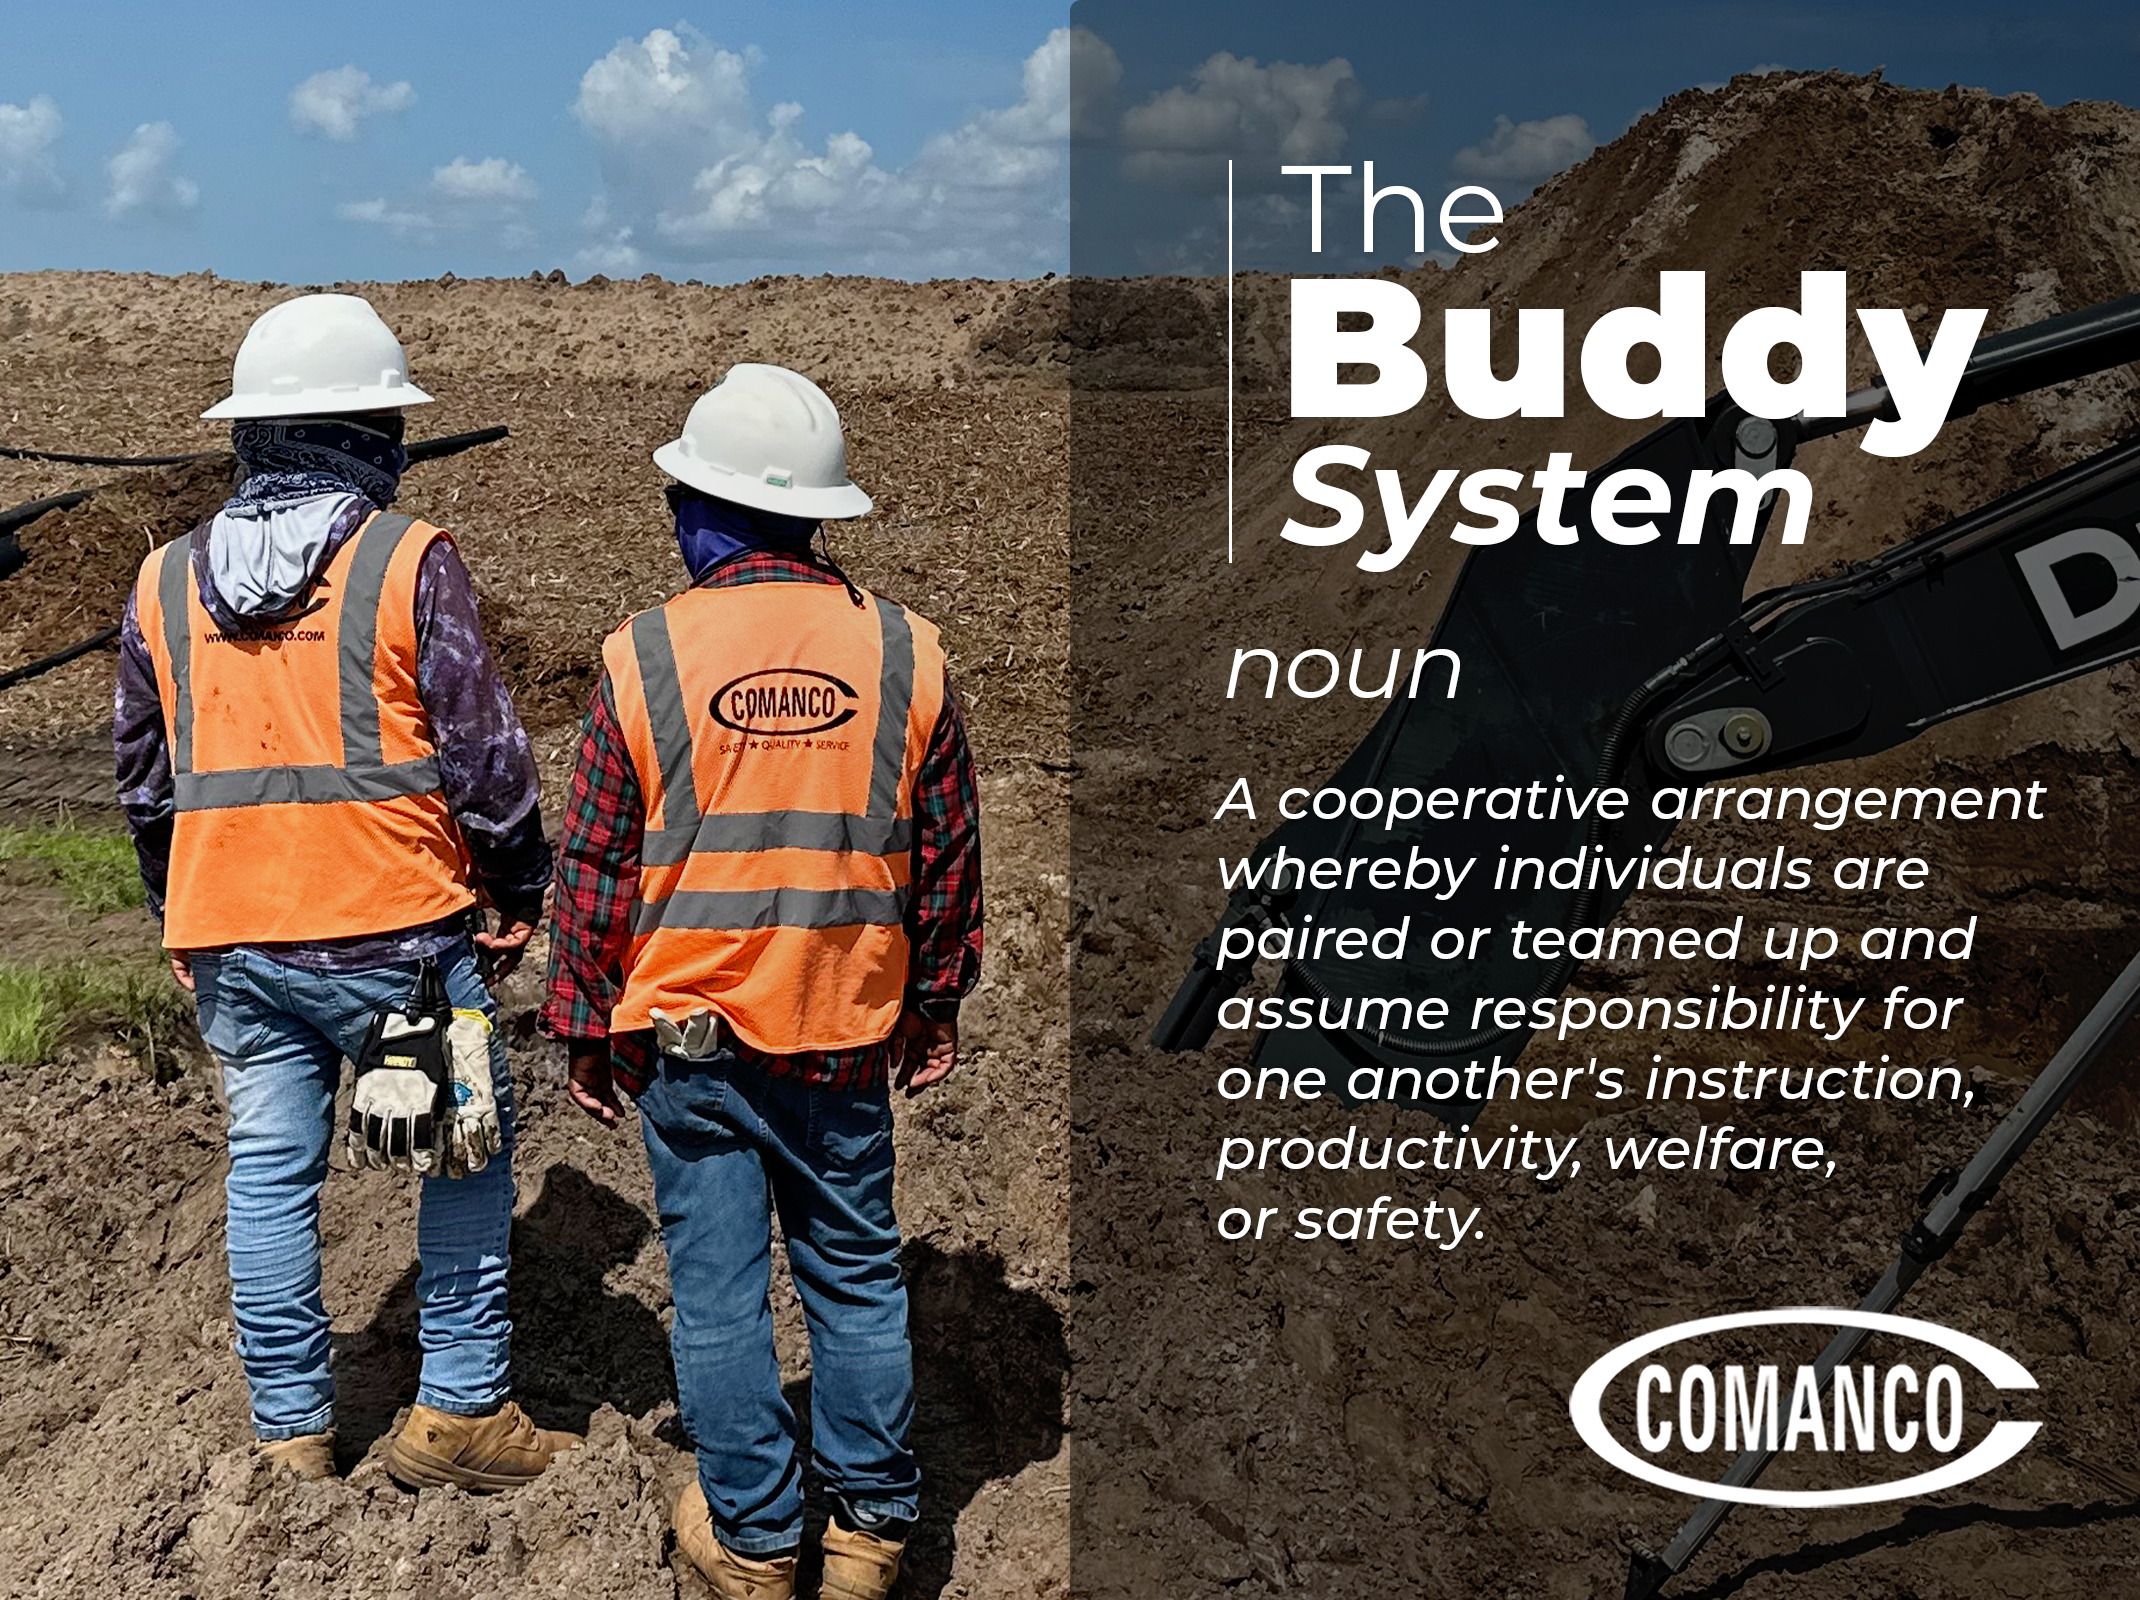 How COMANCO Uses the Buddy System to Protect Workers